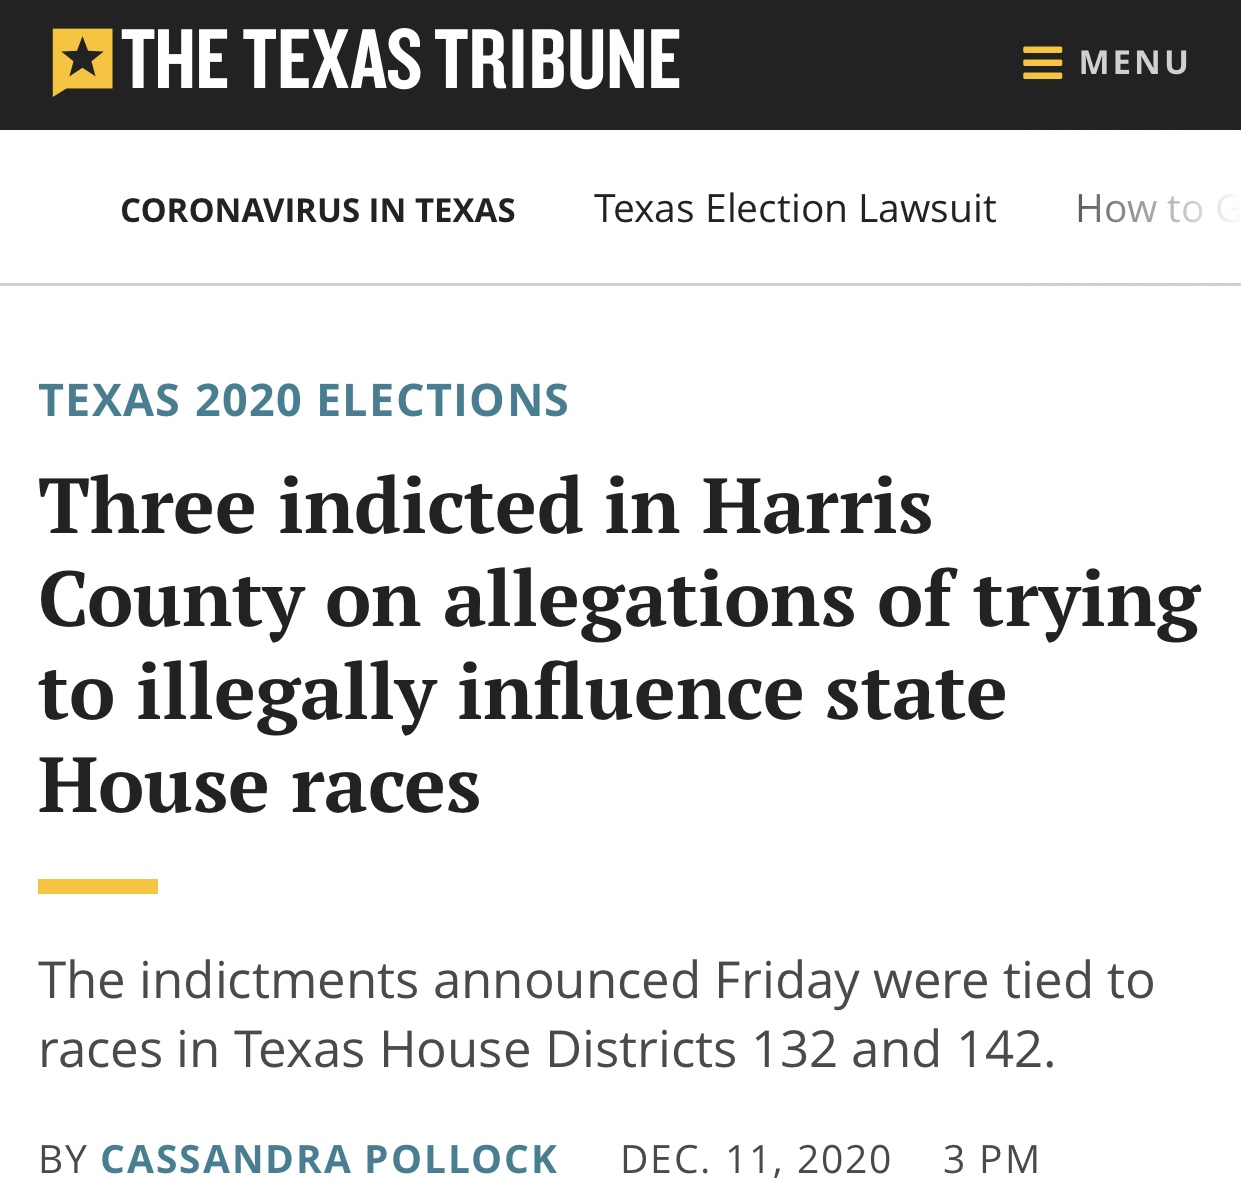 Three indicted in Harris County on allegations of trying to illegally influence state House races